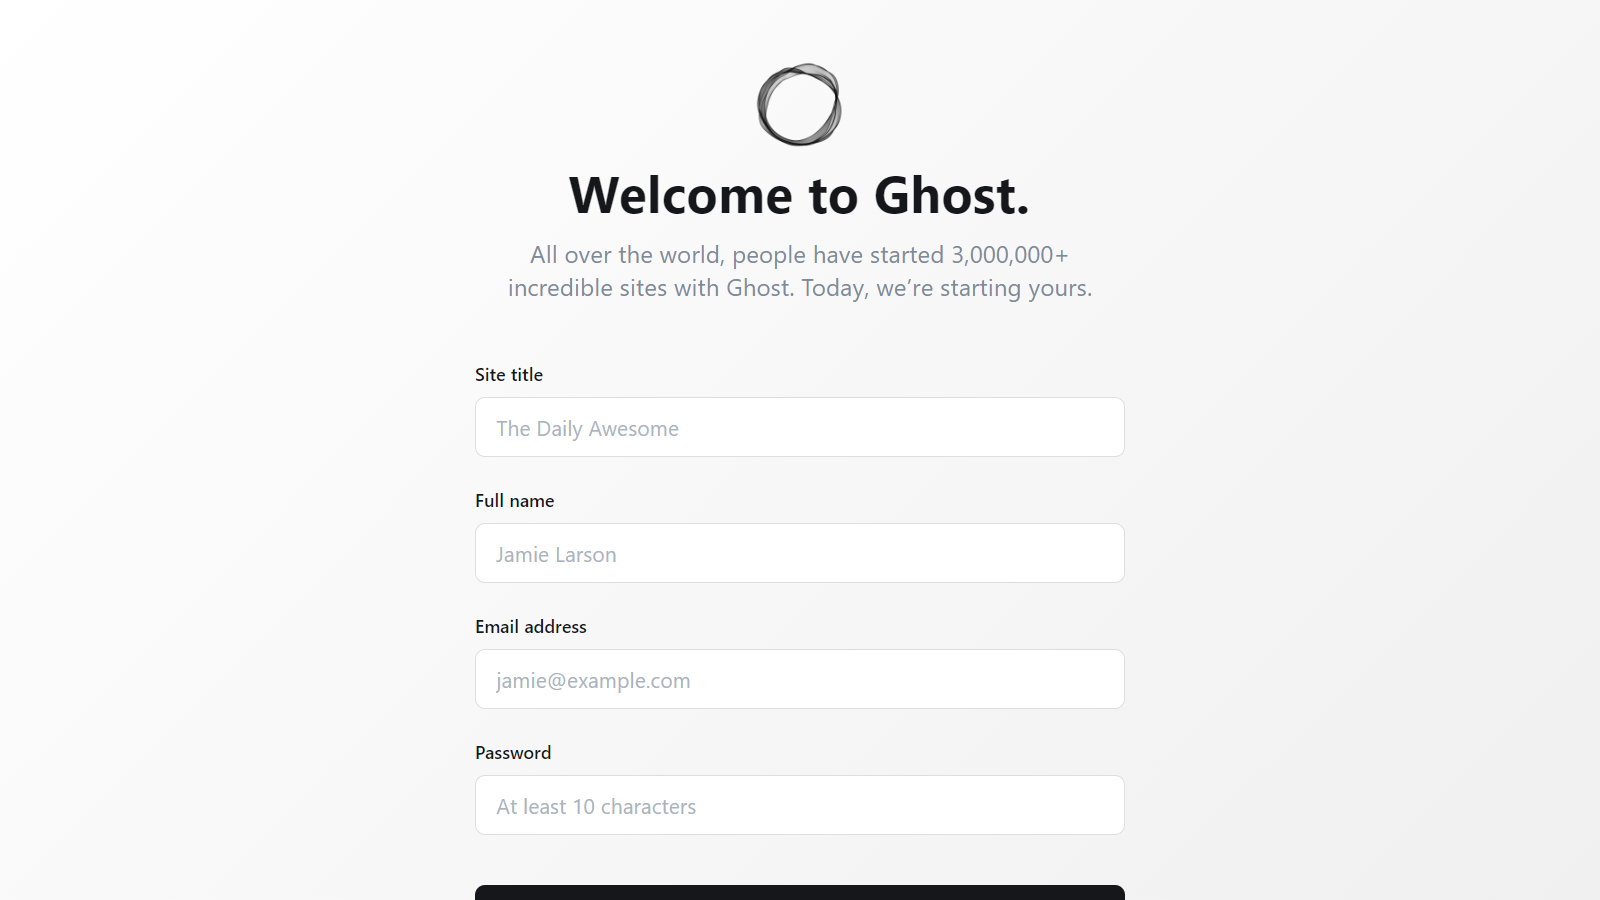 localhost_8080_ghost_(1280x720).png